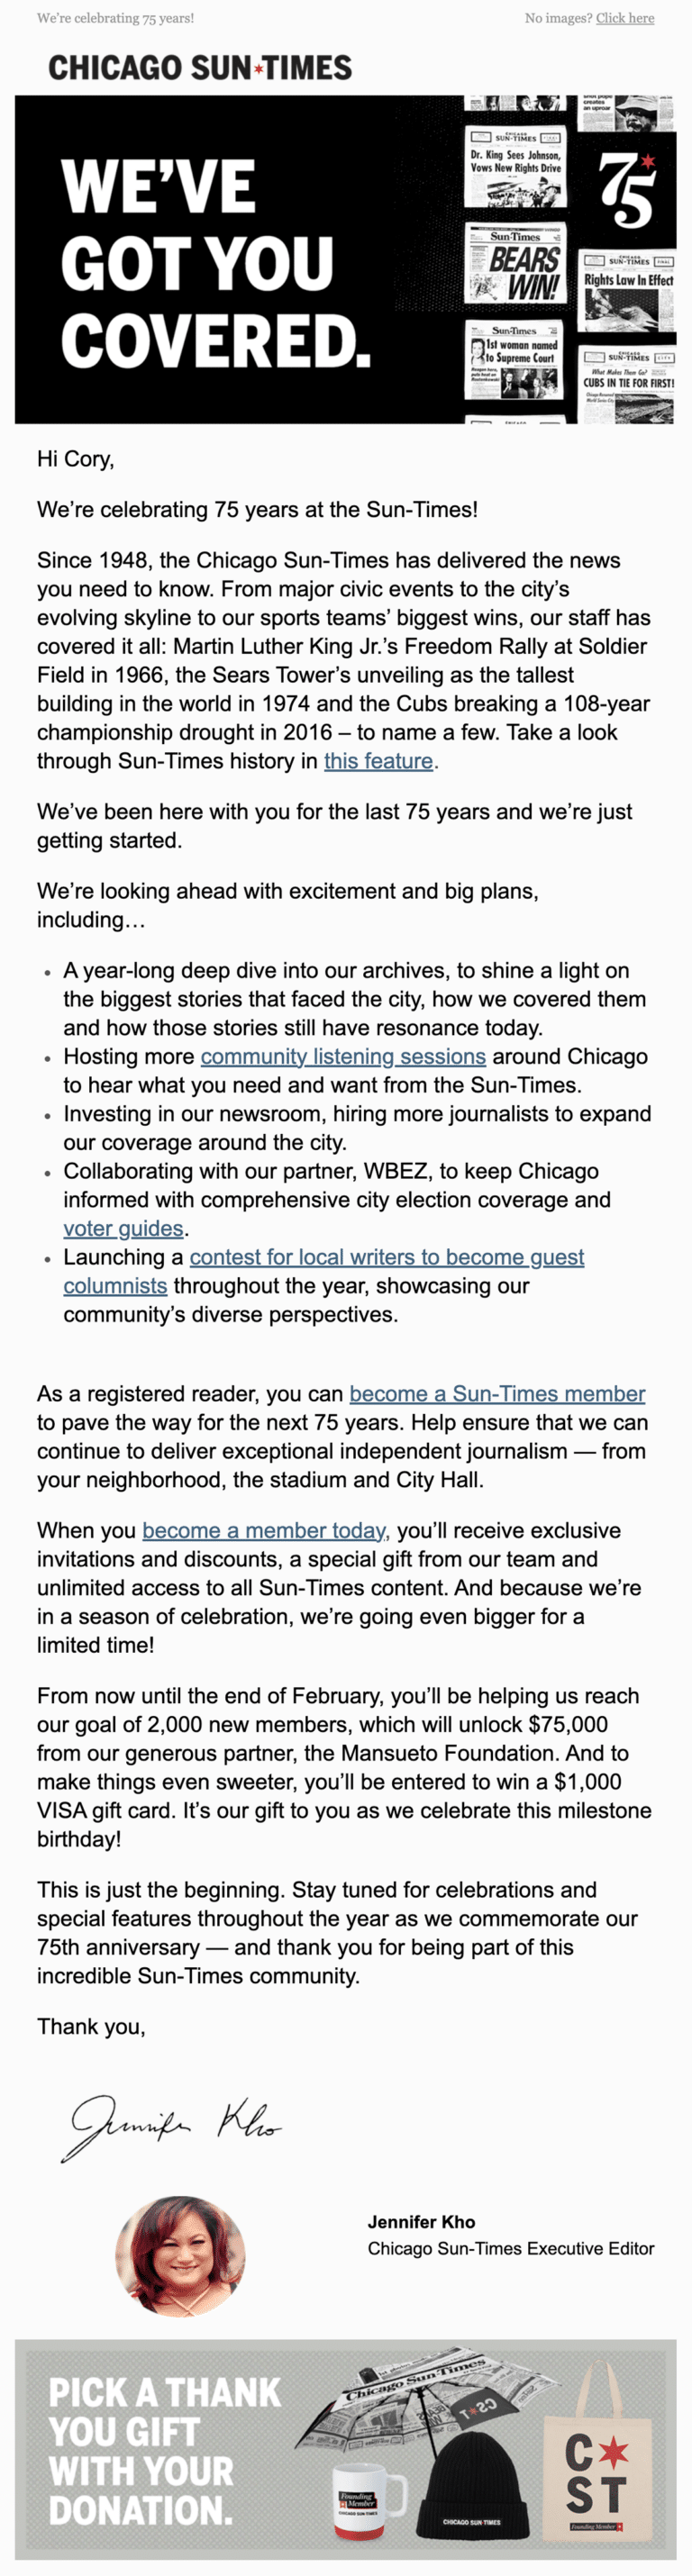 Chicago Sun-Times Birthday Email